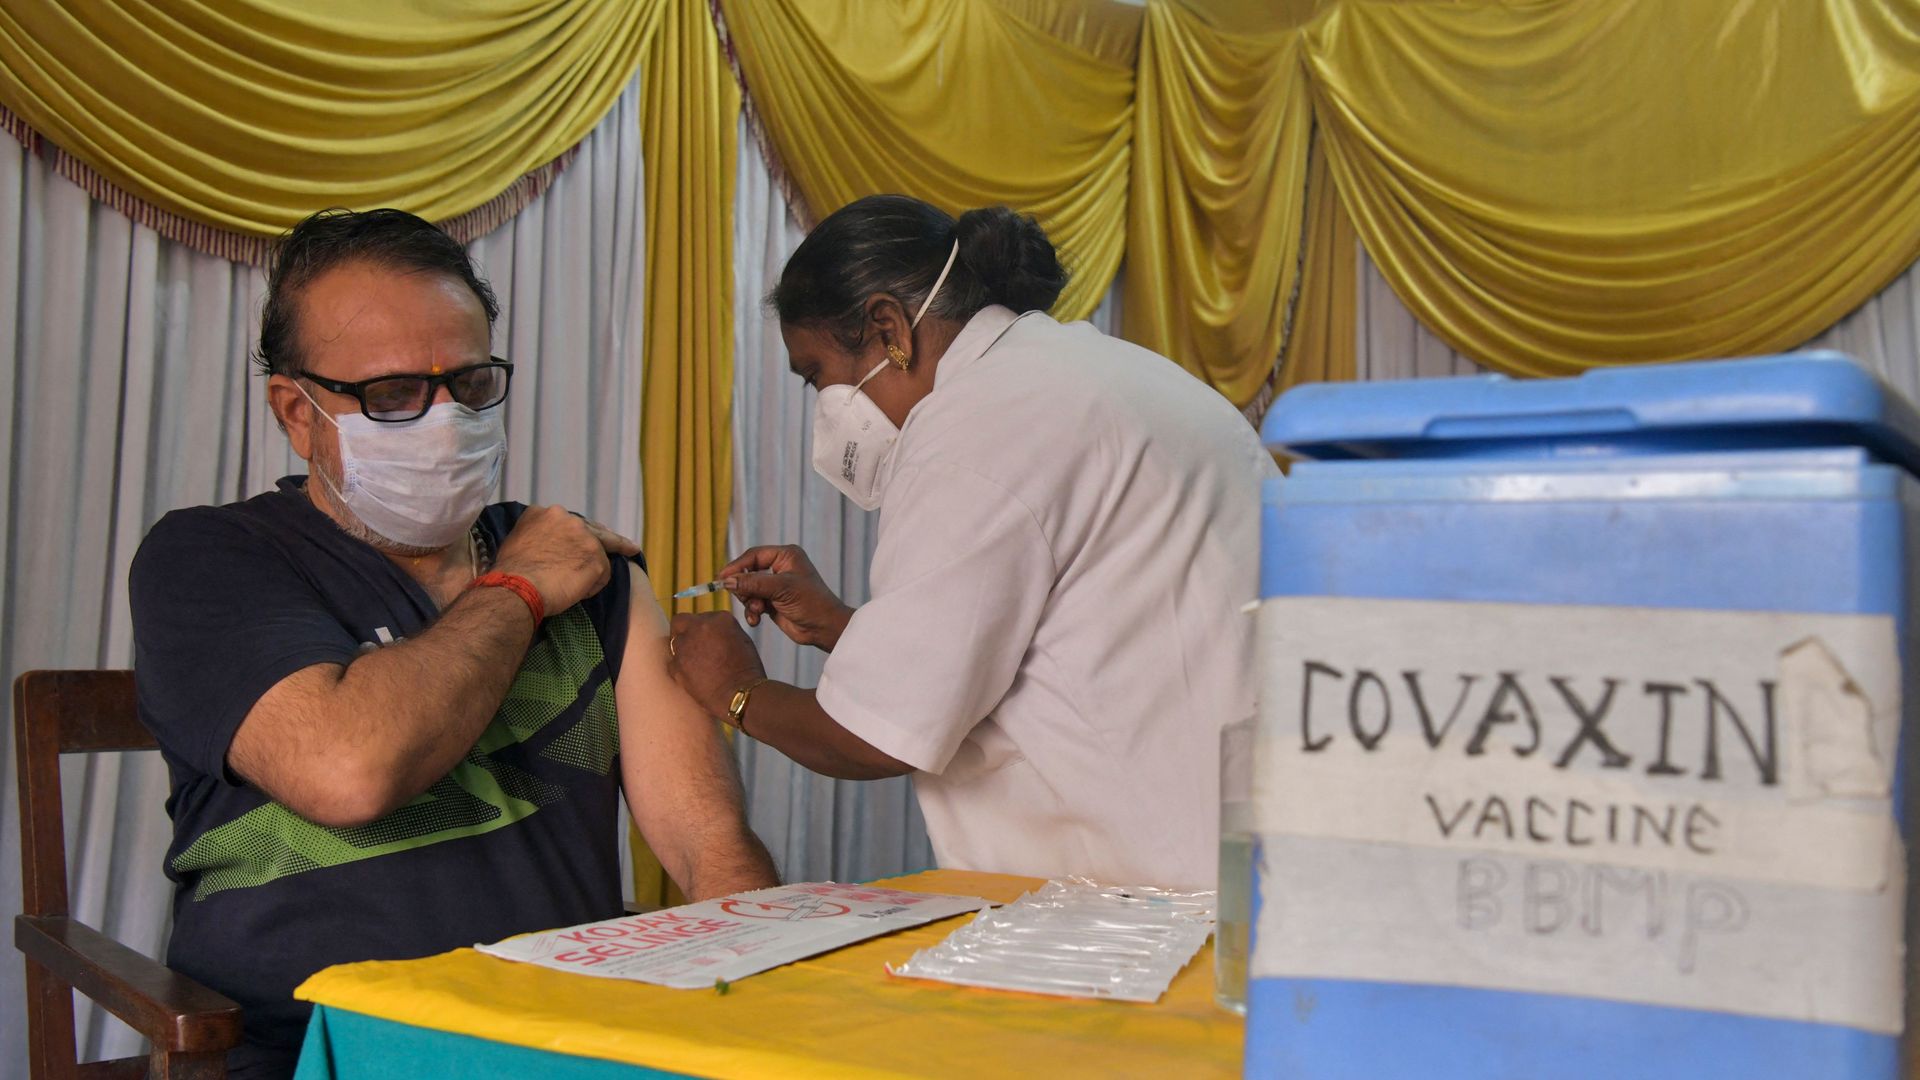 A health worker inoculates a man with a dose of Covaxin’s COVID-19 vaccine in Bangalore, India on June 9, 2021